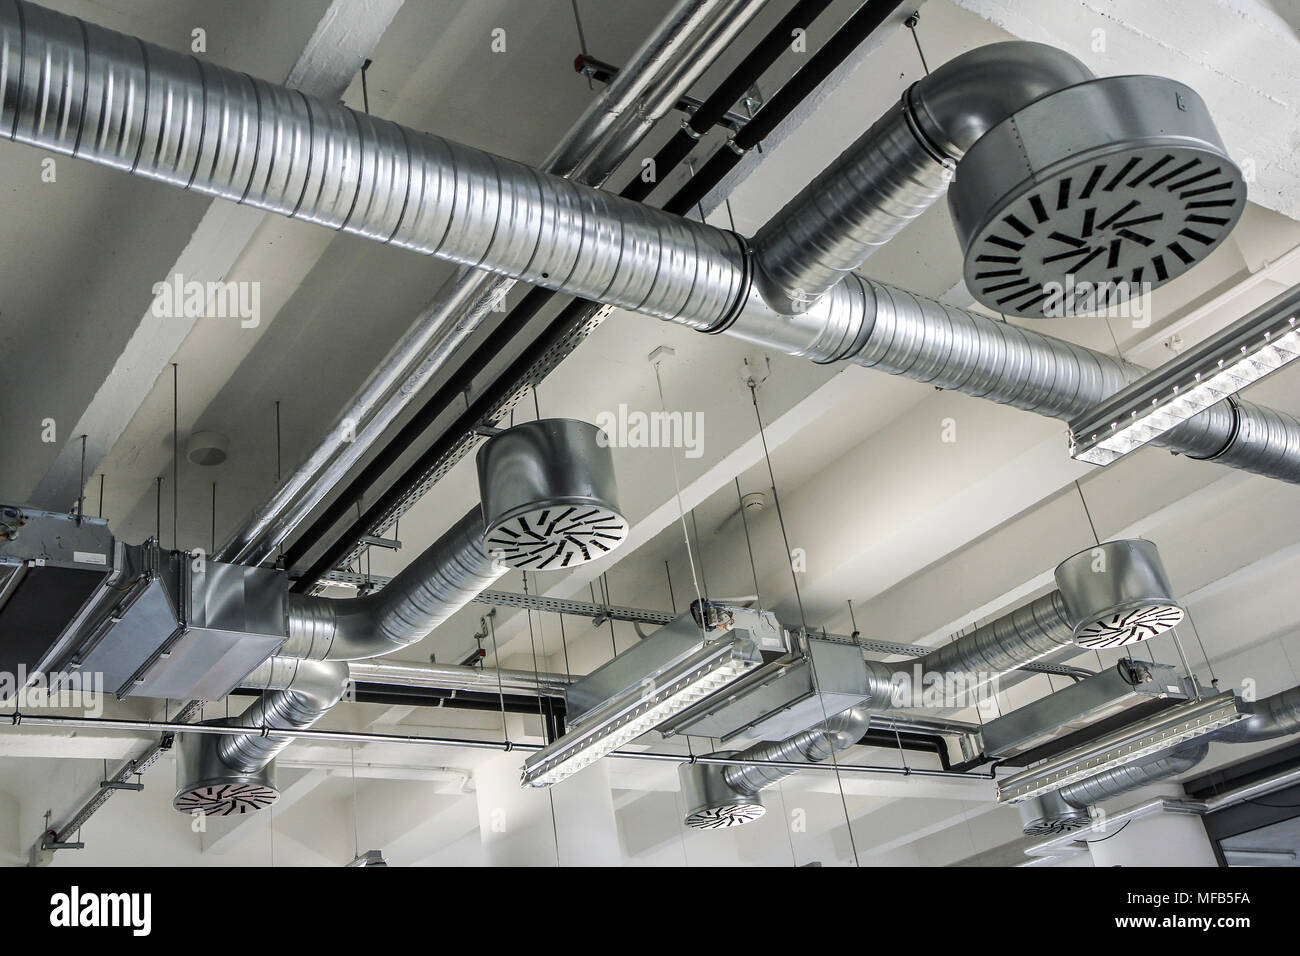 A detail of the air conditioning on the ceiling of the industrial building. Stock Photo